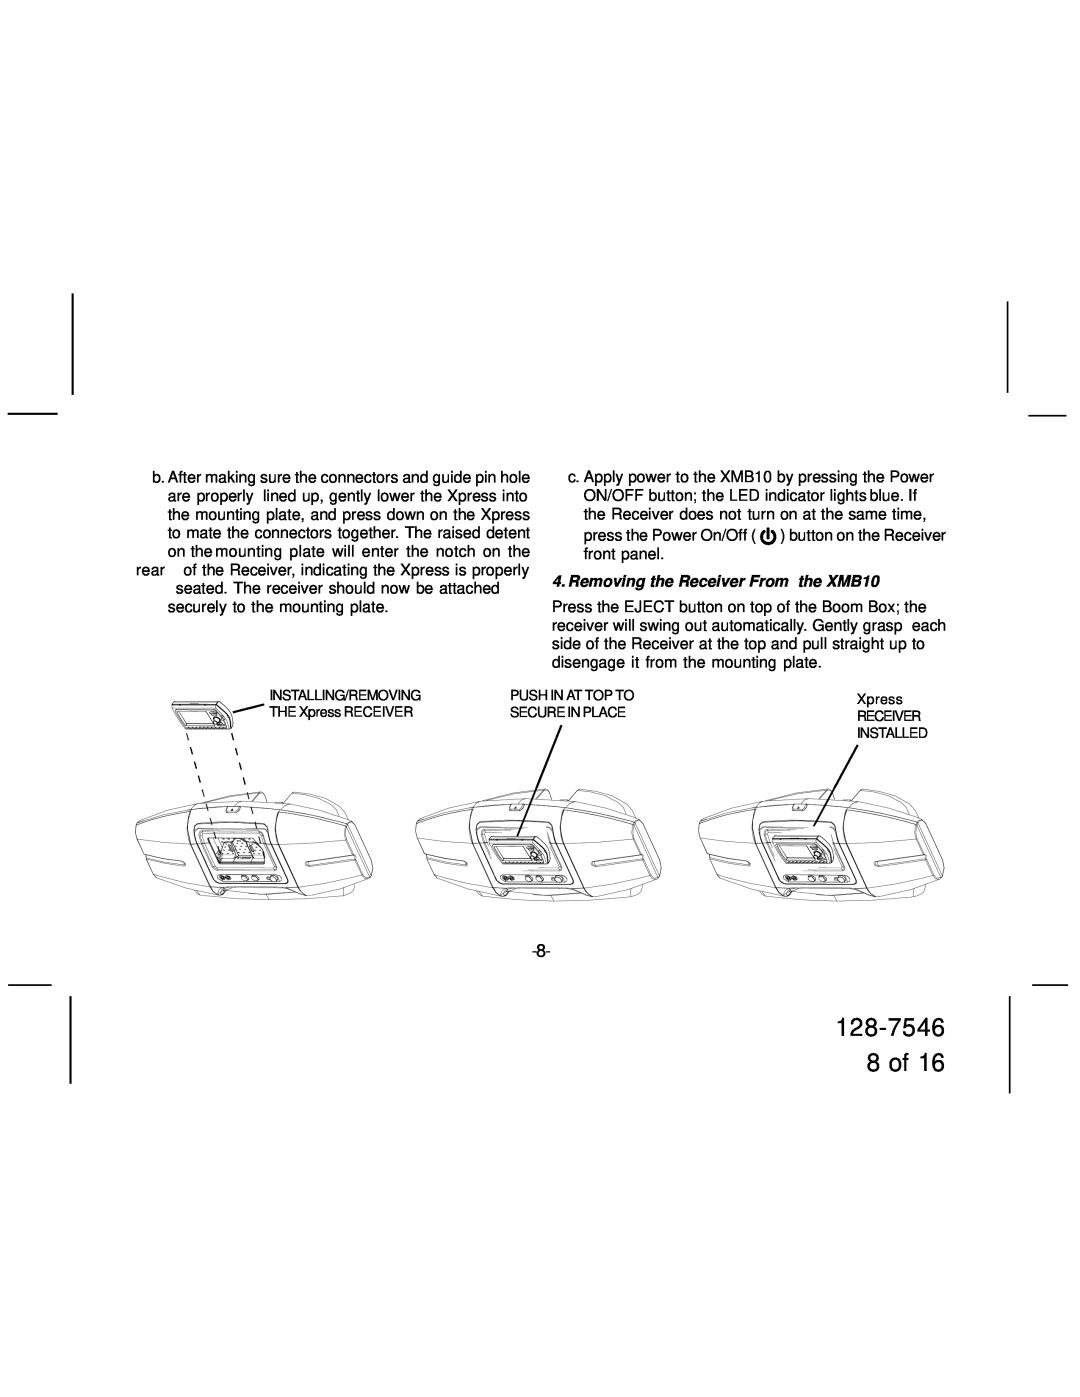 Audiovox manual 128-7546 8 of, Removing the Receiver From the XMB10 